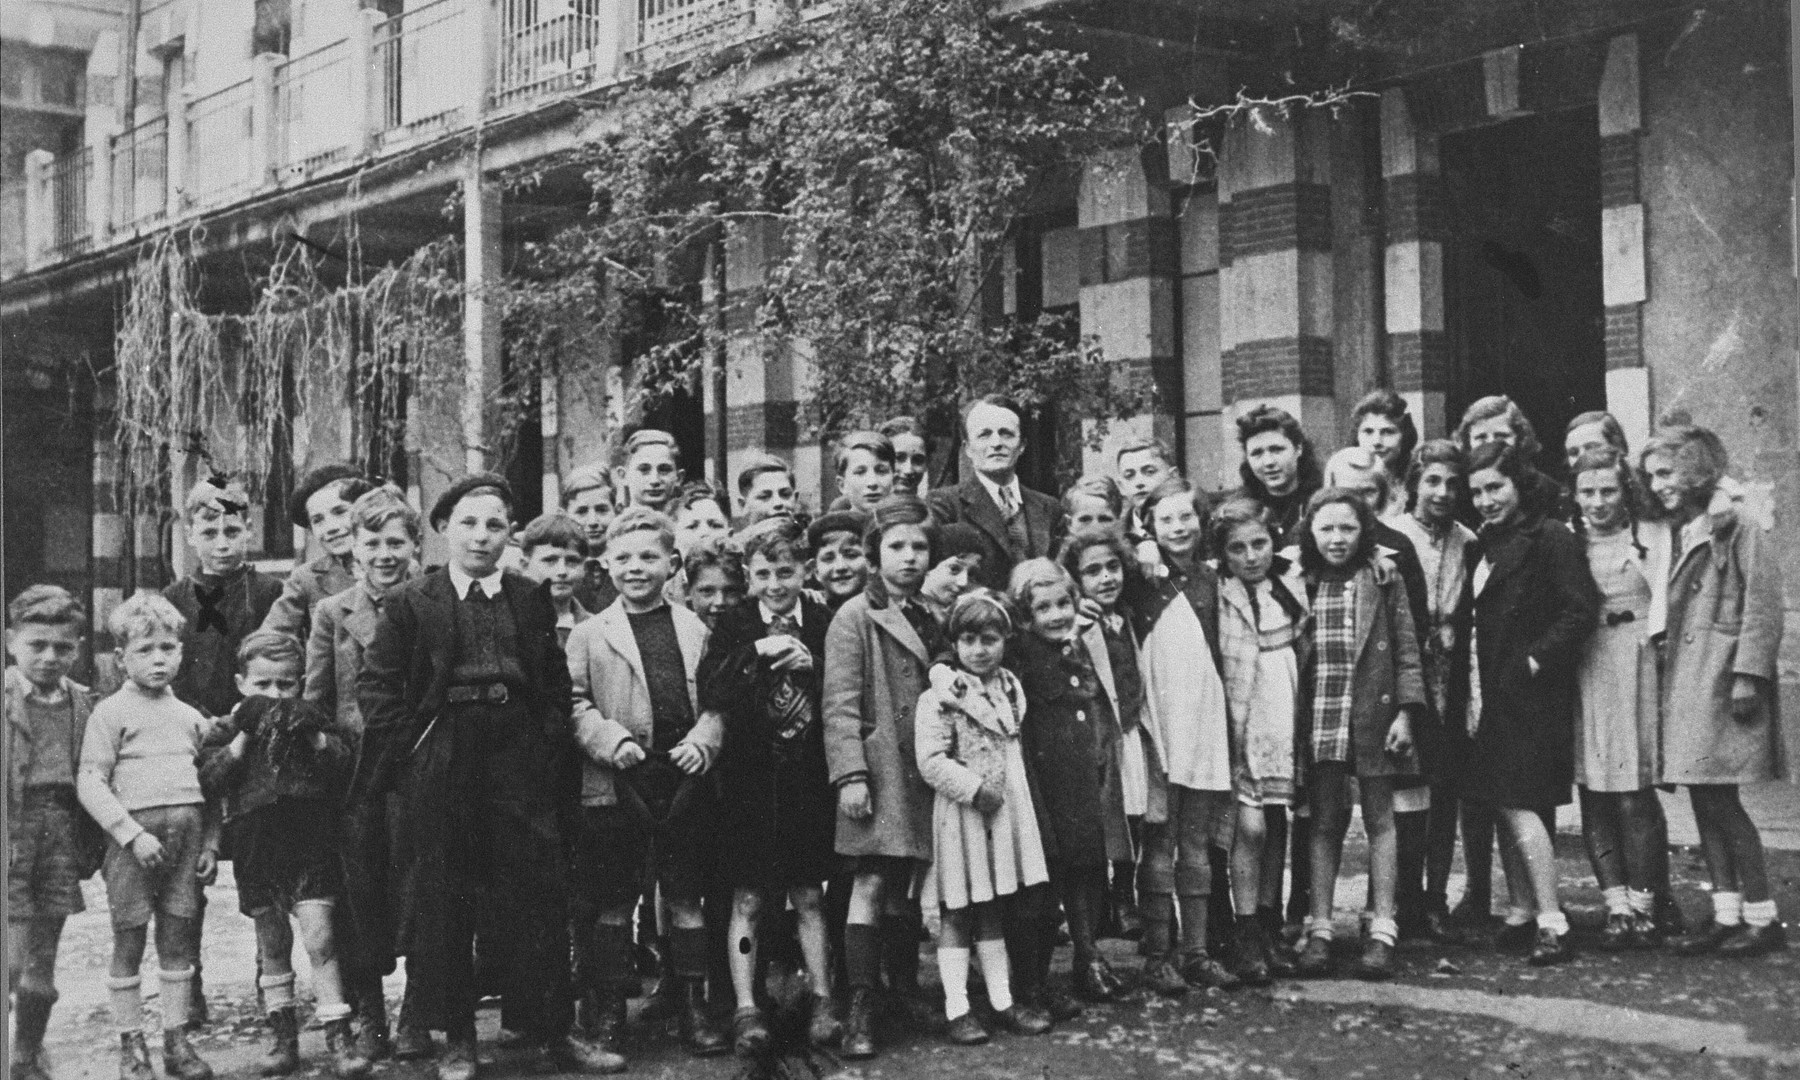 Group portrait of Jewish children at the OSE home, "Maison des Pupilles de la Nation," in Aspet, France.  

Standing in the middle of the group is the director, Henri Couvot.  Michael Oppenheimer is pictured in the last row, second from the left, his face partially hidden.  

The children were brought to the home from French transit camps with the assistance of the American Friends Service Committee (AFSC) and the Oeuvre de secours aux enfants (OSE).